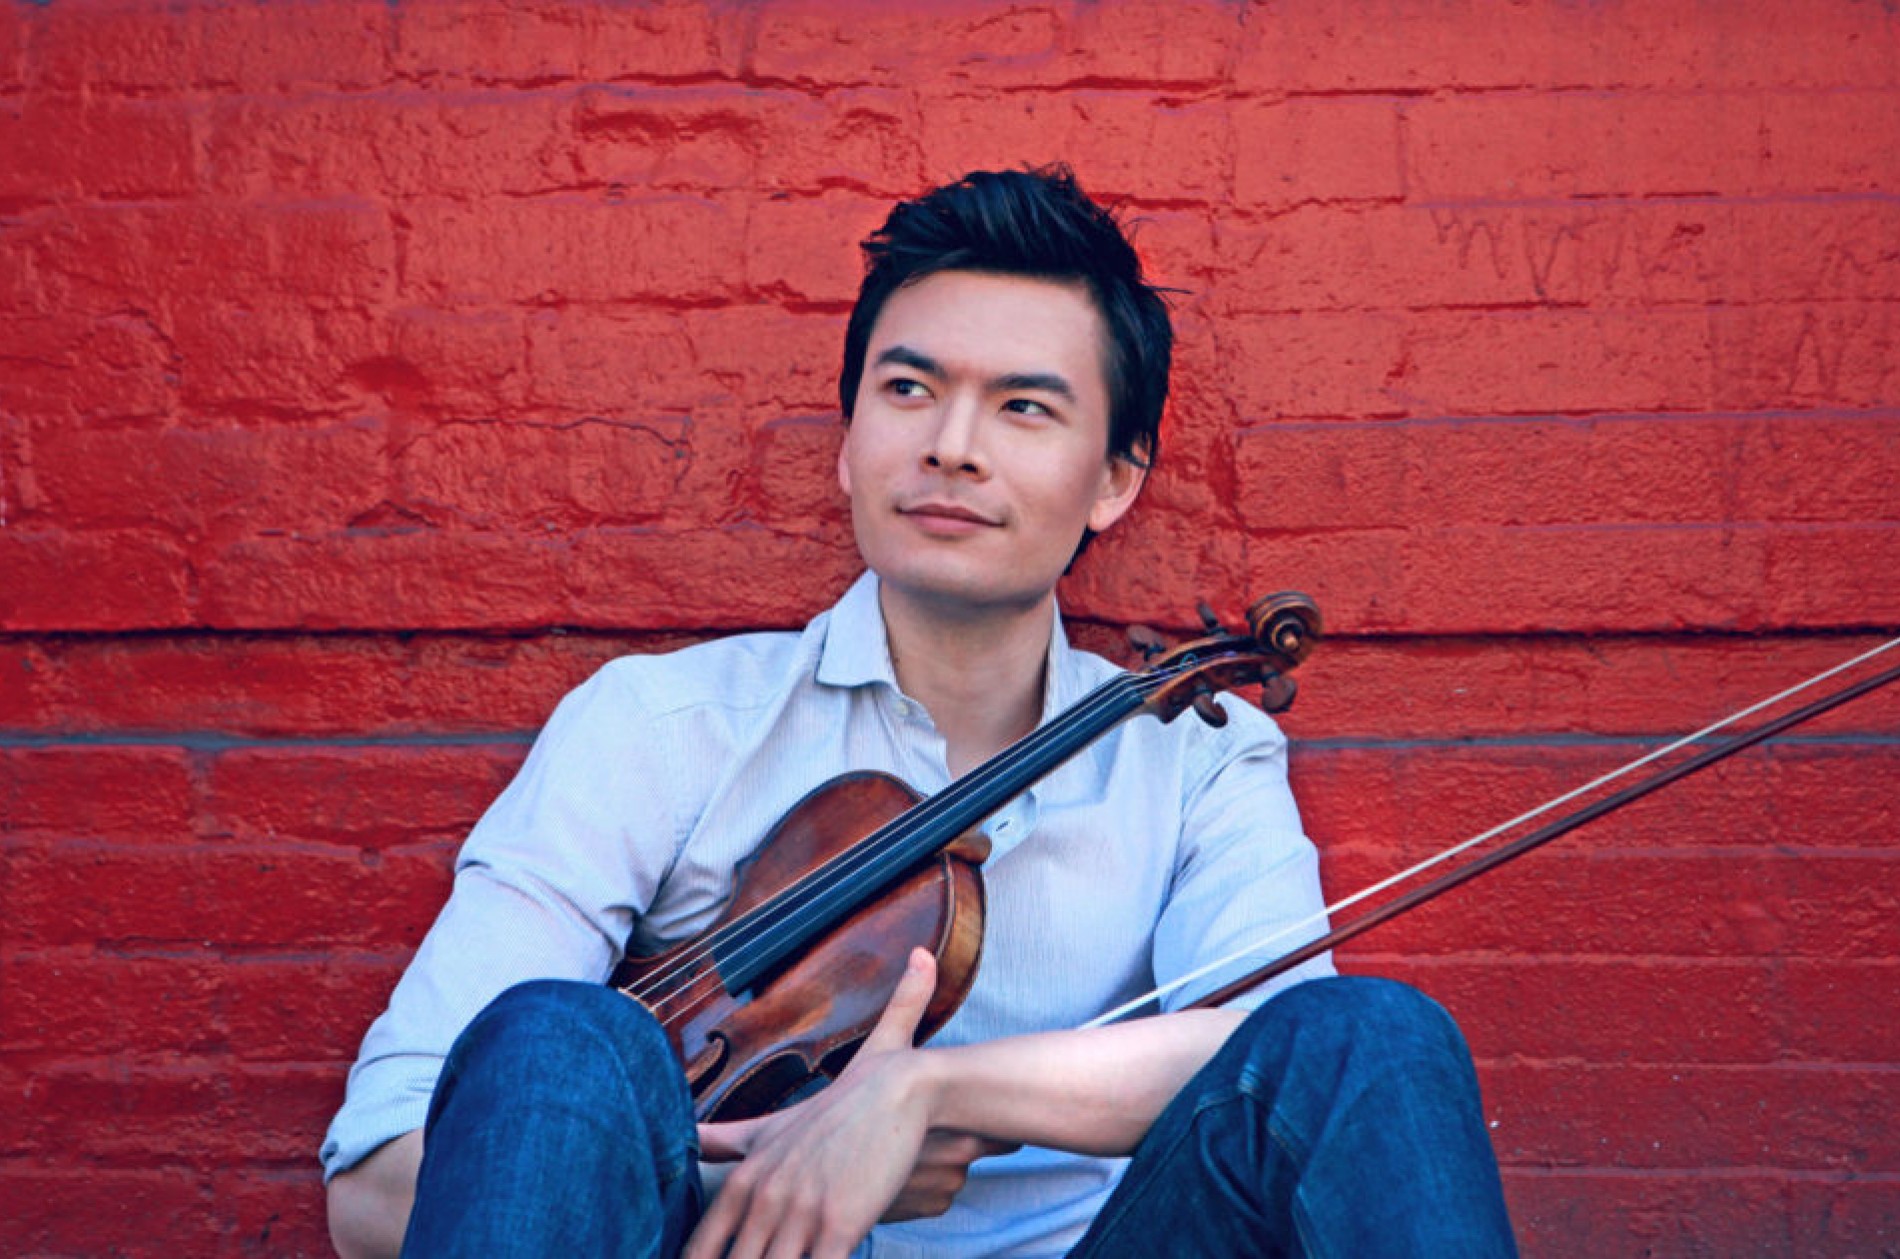 Stefan Jackiw holding a violin while sitting in front of a painted red brick wall